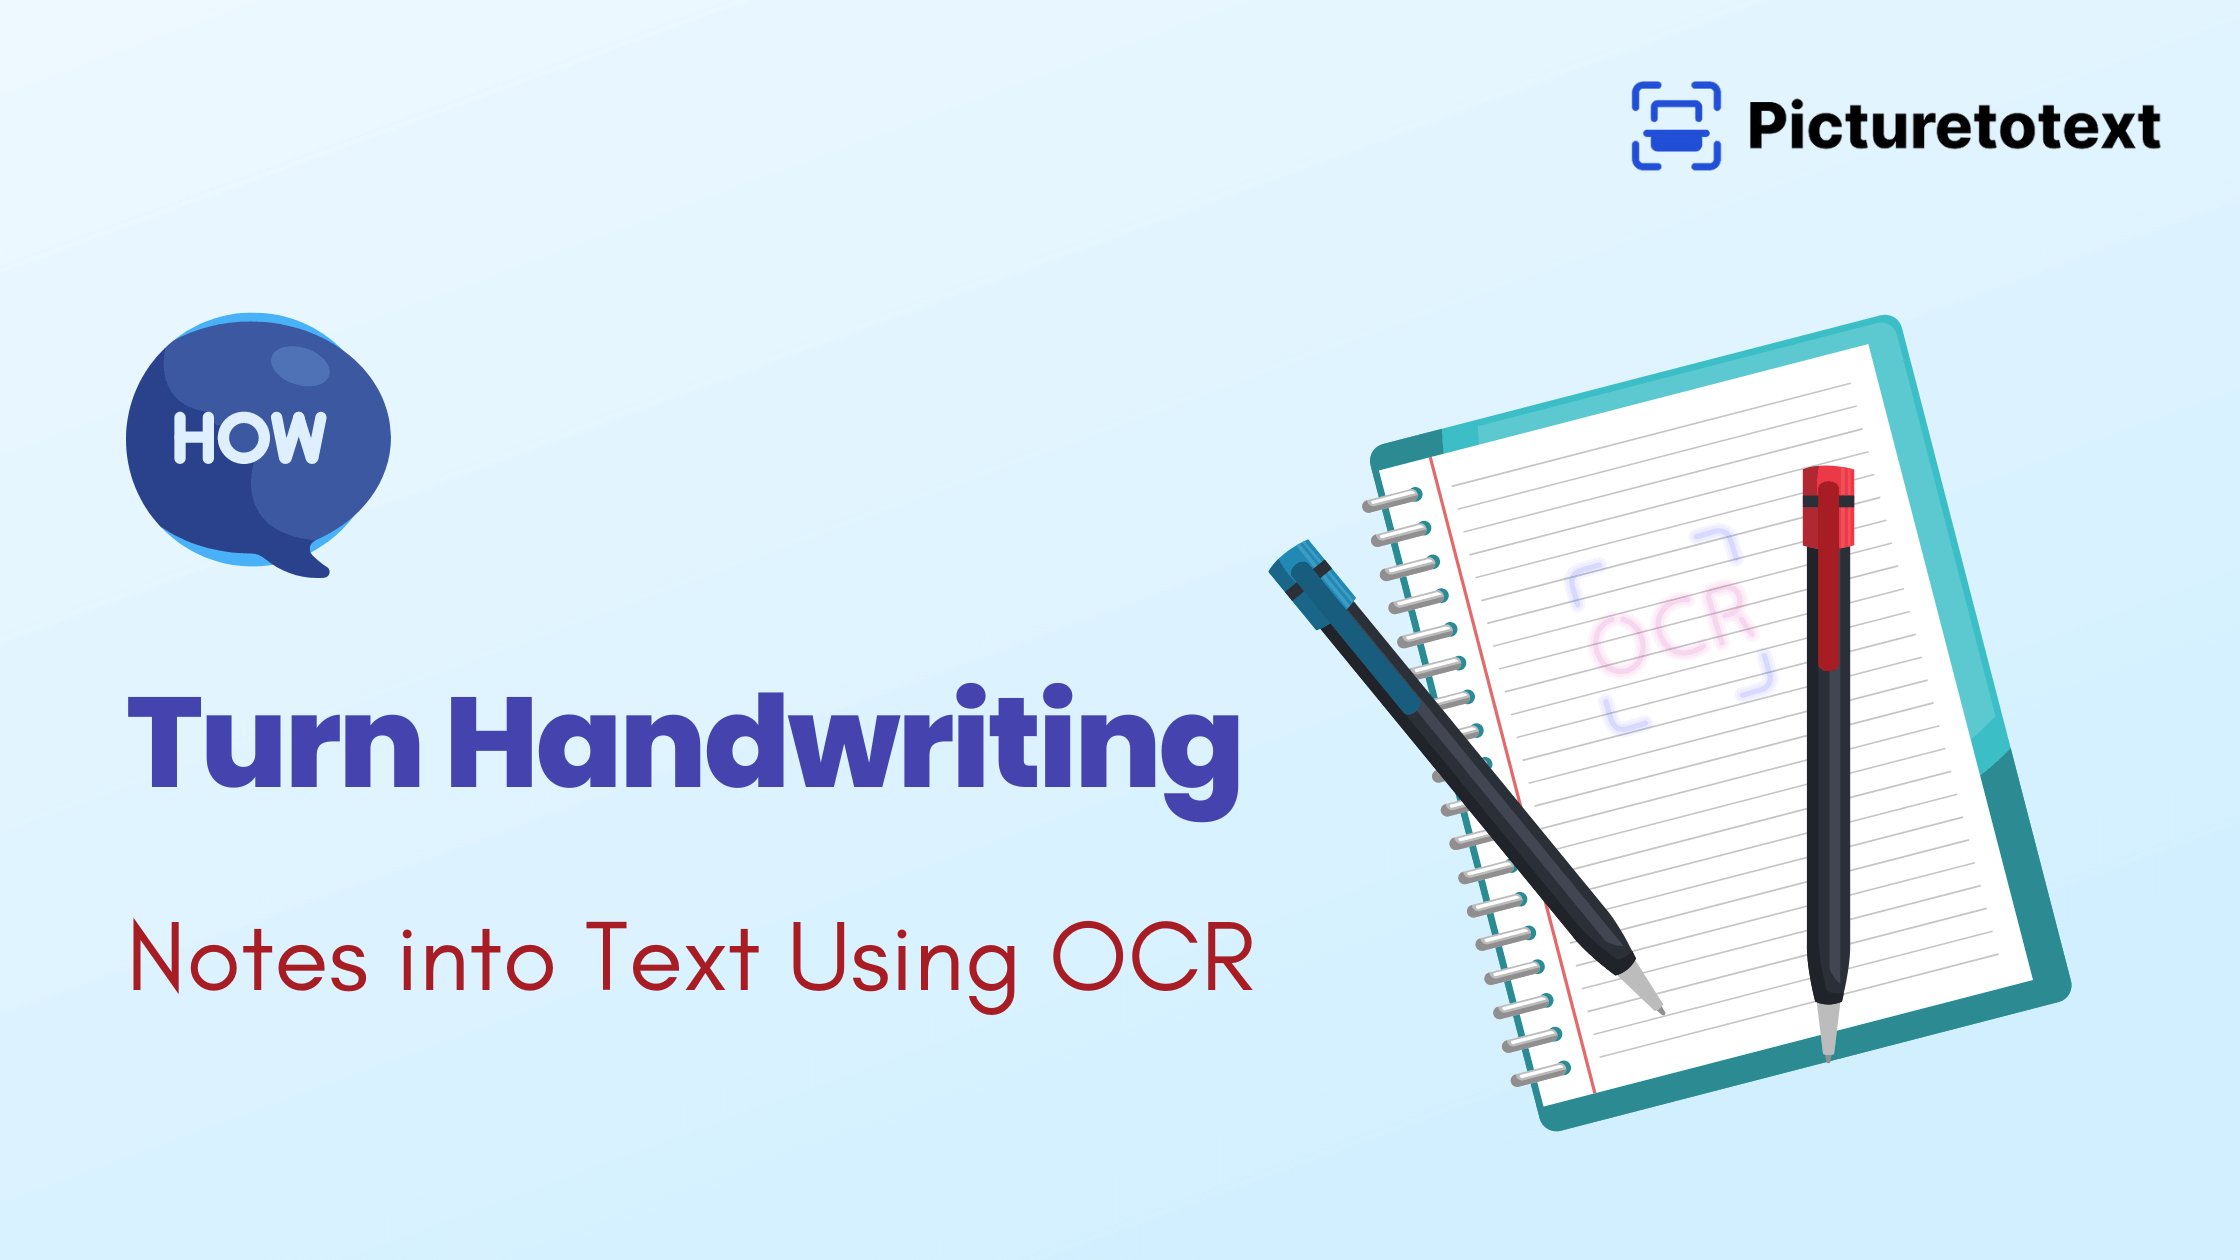 How to Turn Handwriting Notes into Text Using OCR?